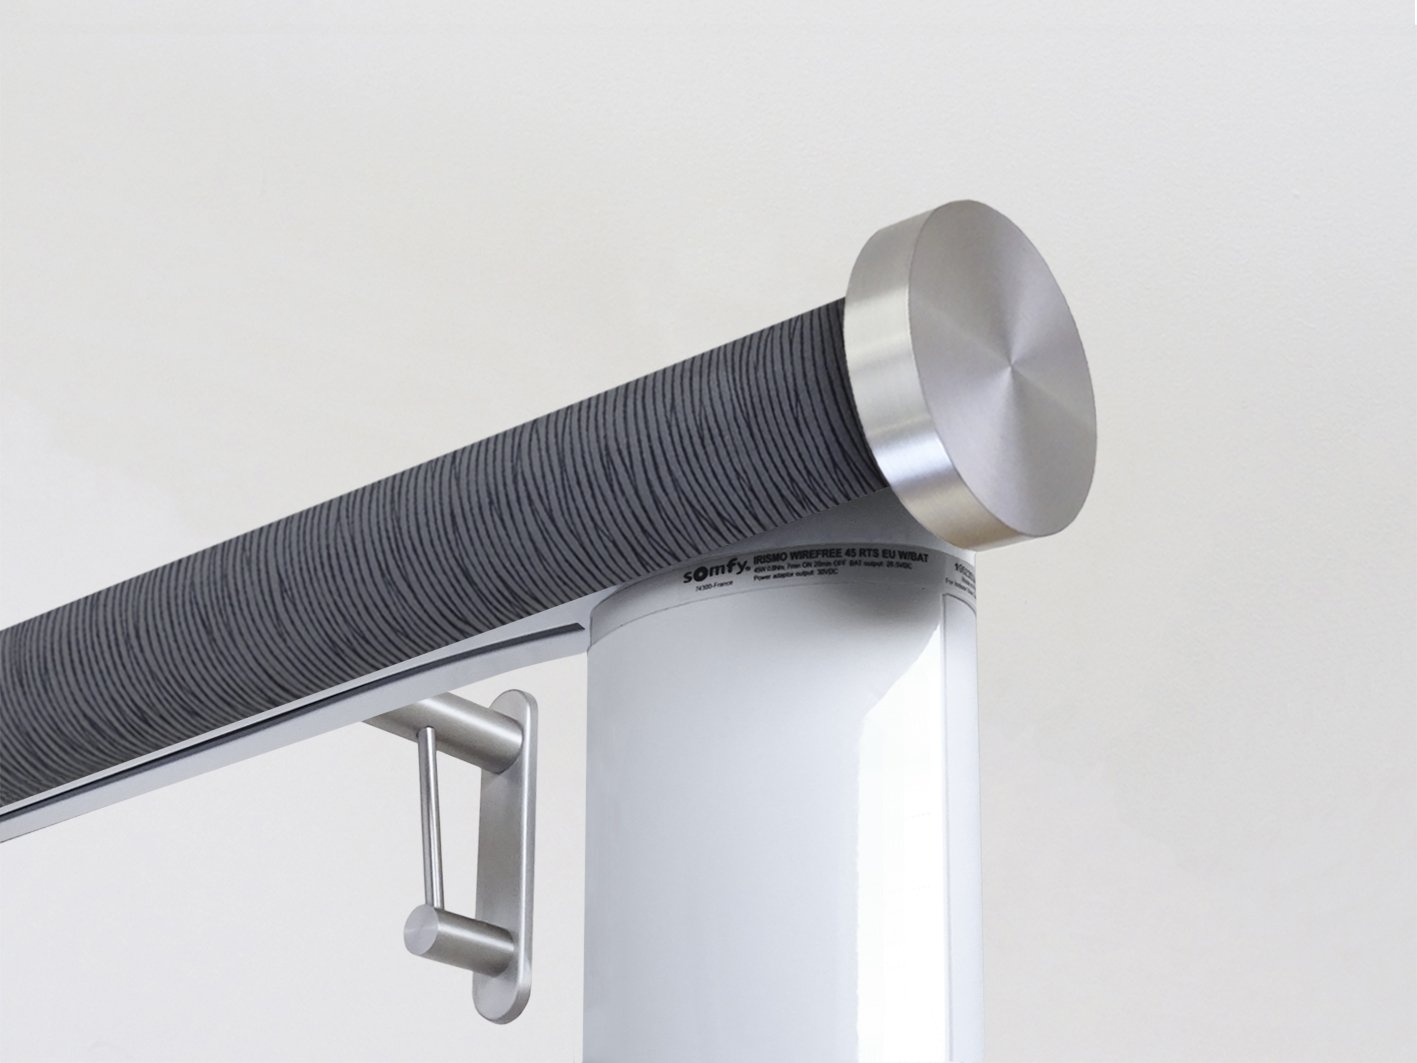 Motorised electric curtain pole in flint blue, wireless & battery powered using the Somfy Glydea track | Walcot House UK curtain pole specialists